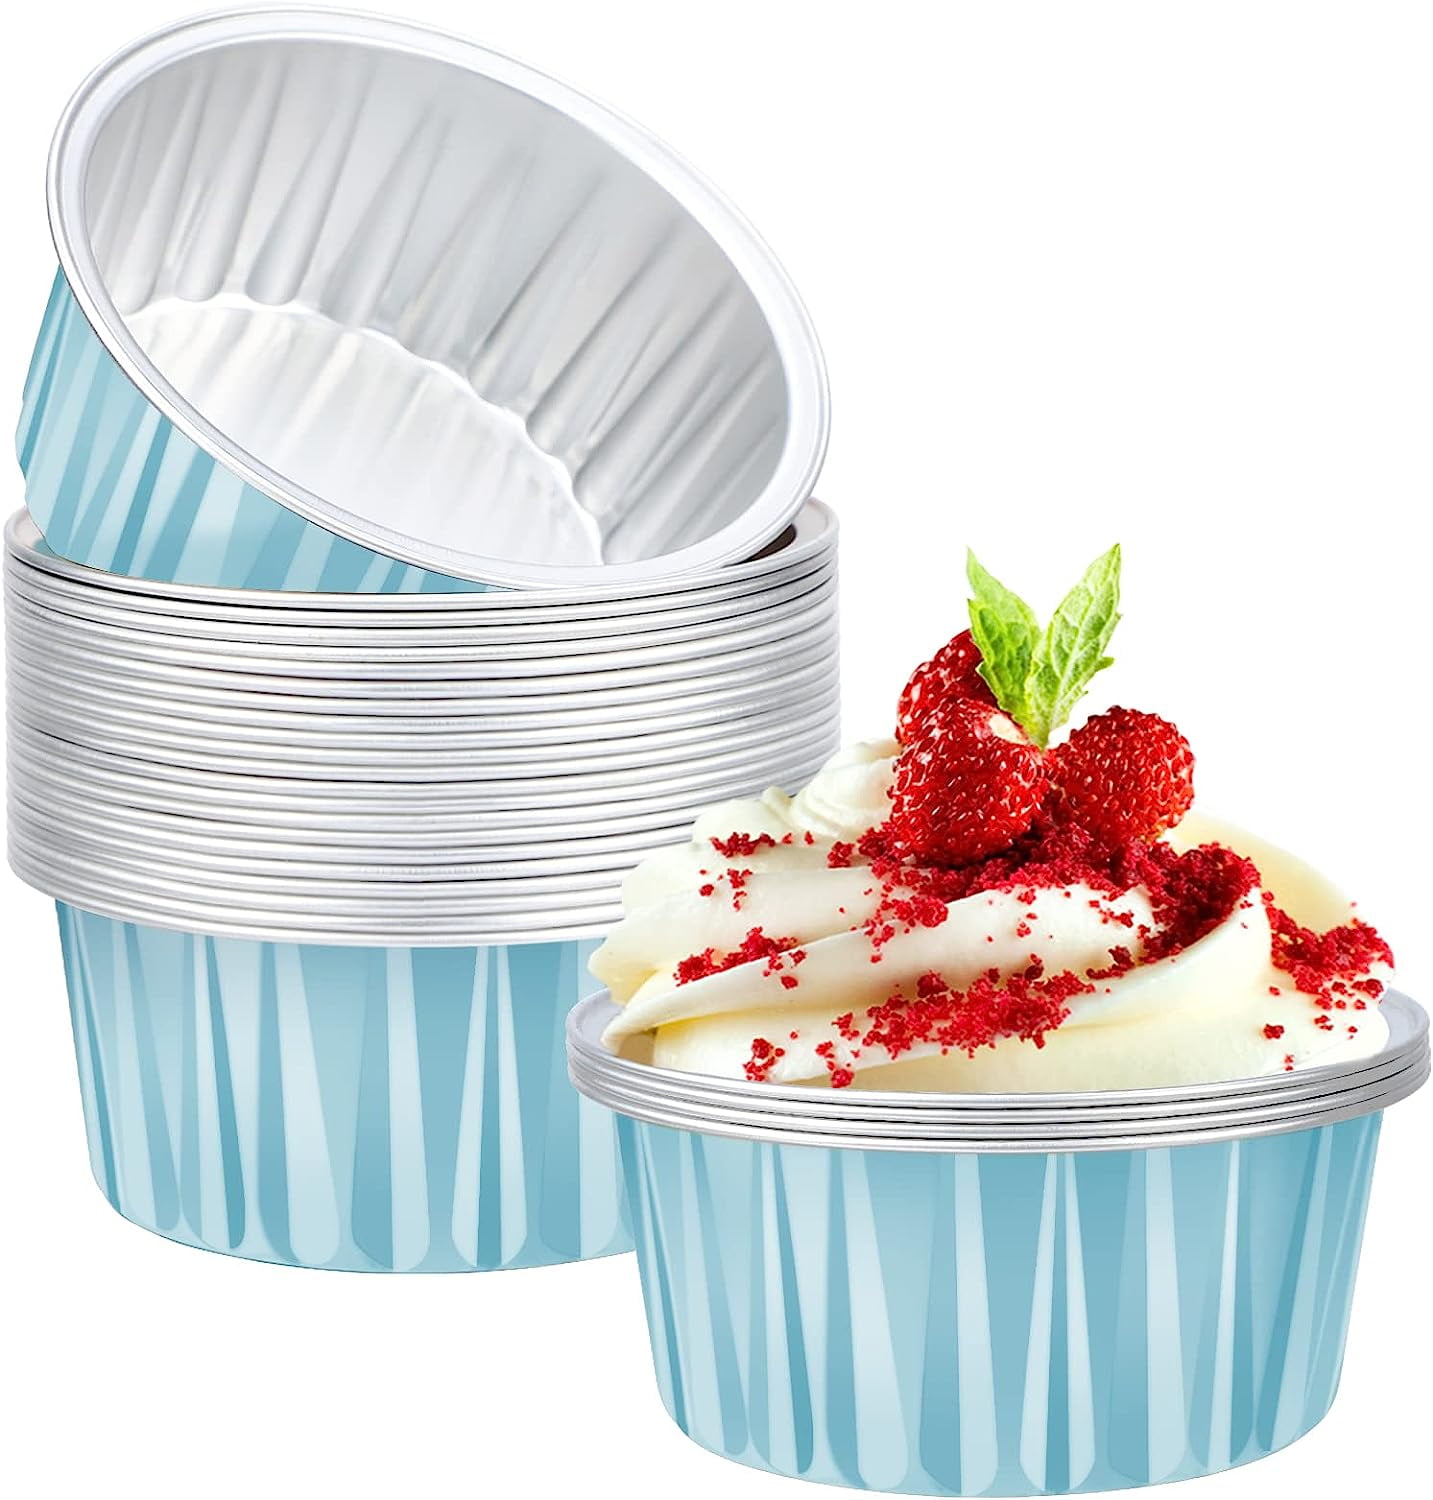 Flan Containers with Lids 5oz Disposable Dessert Holders 25pcs